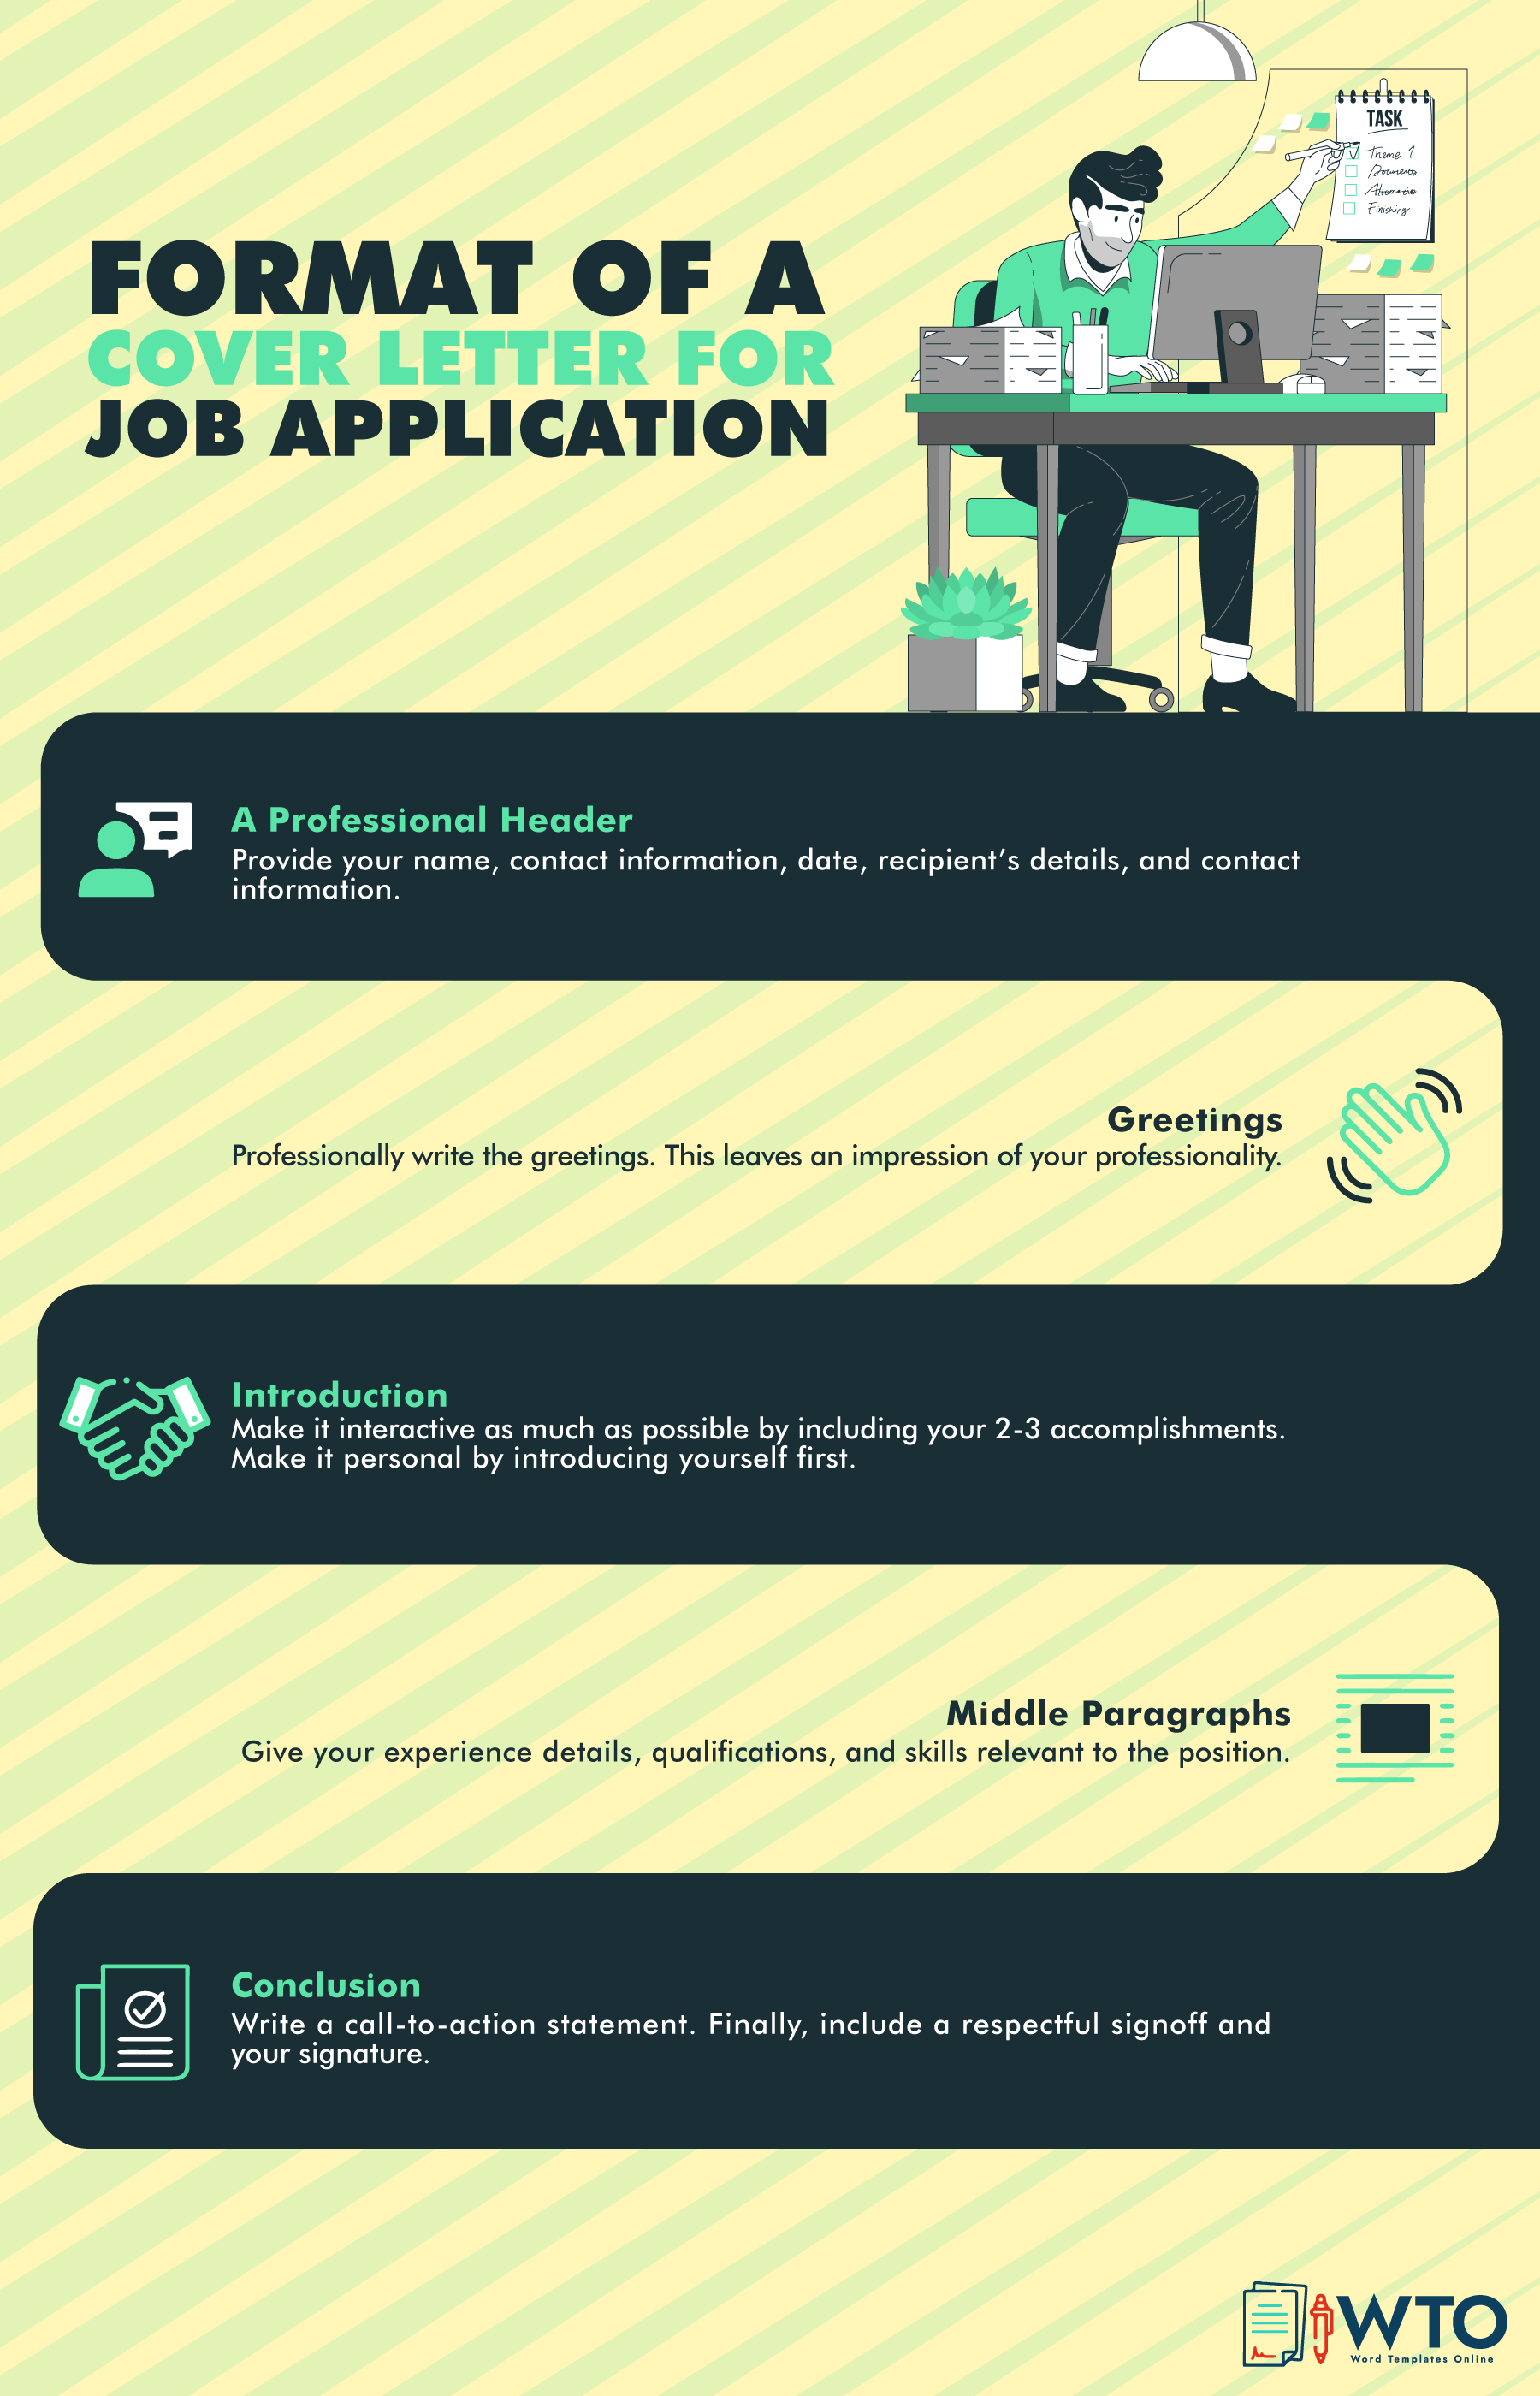 This infographic is about format of job application cover letter.